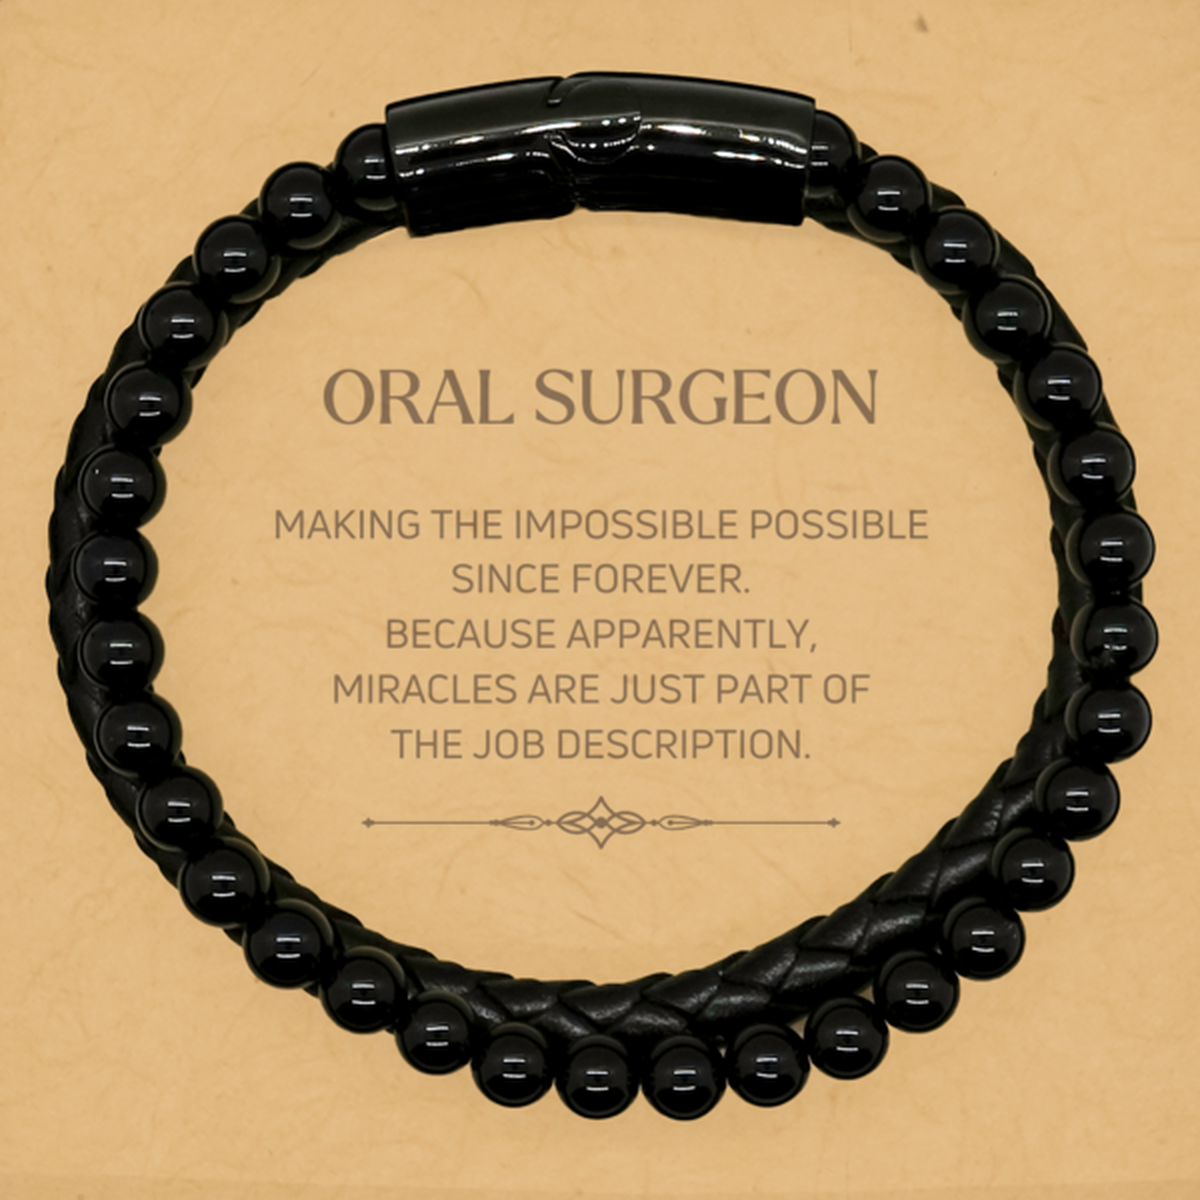 Funny Oral Surgeon Gifts, Miracles are just part of the job description, Inspirational Birthday Stone Leather Bracelets For Oral Surgeon, Men, Women, Coworkers, Friends, Boss